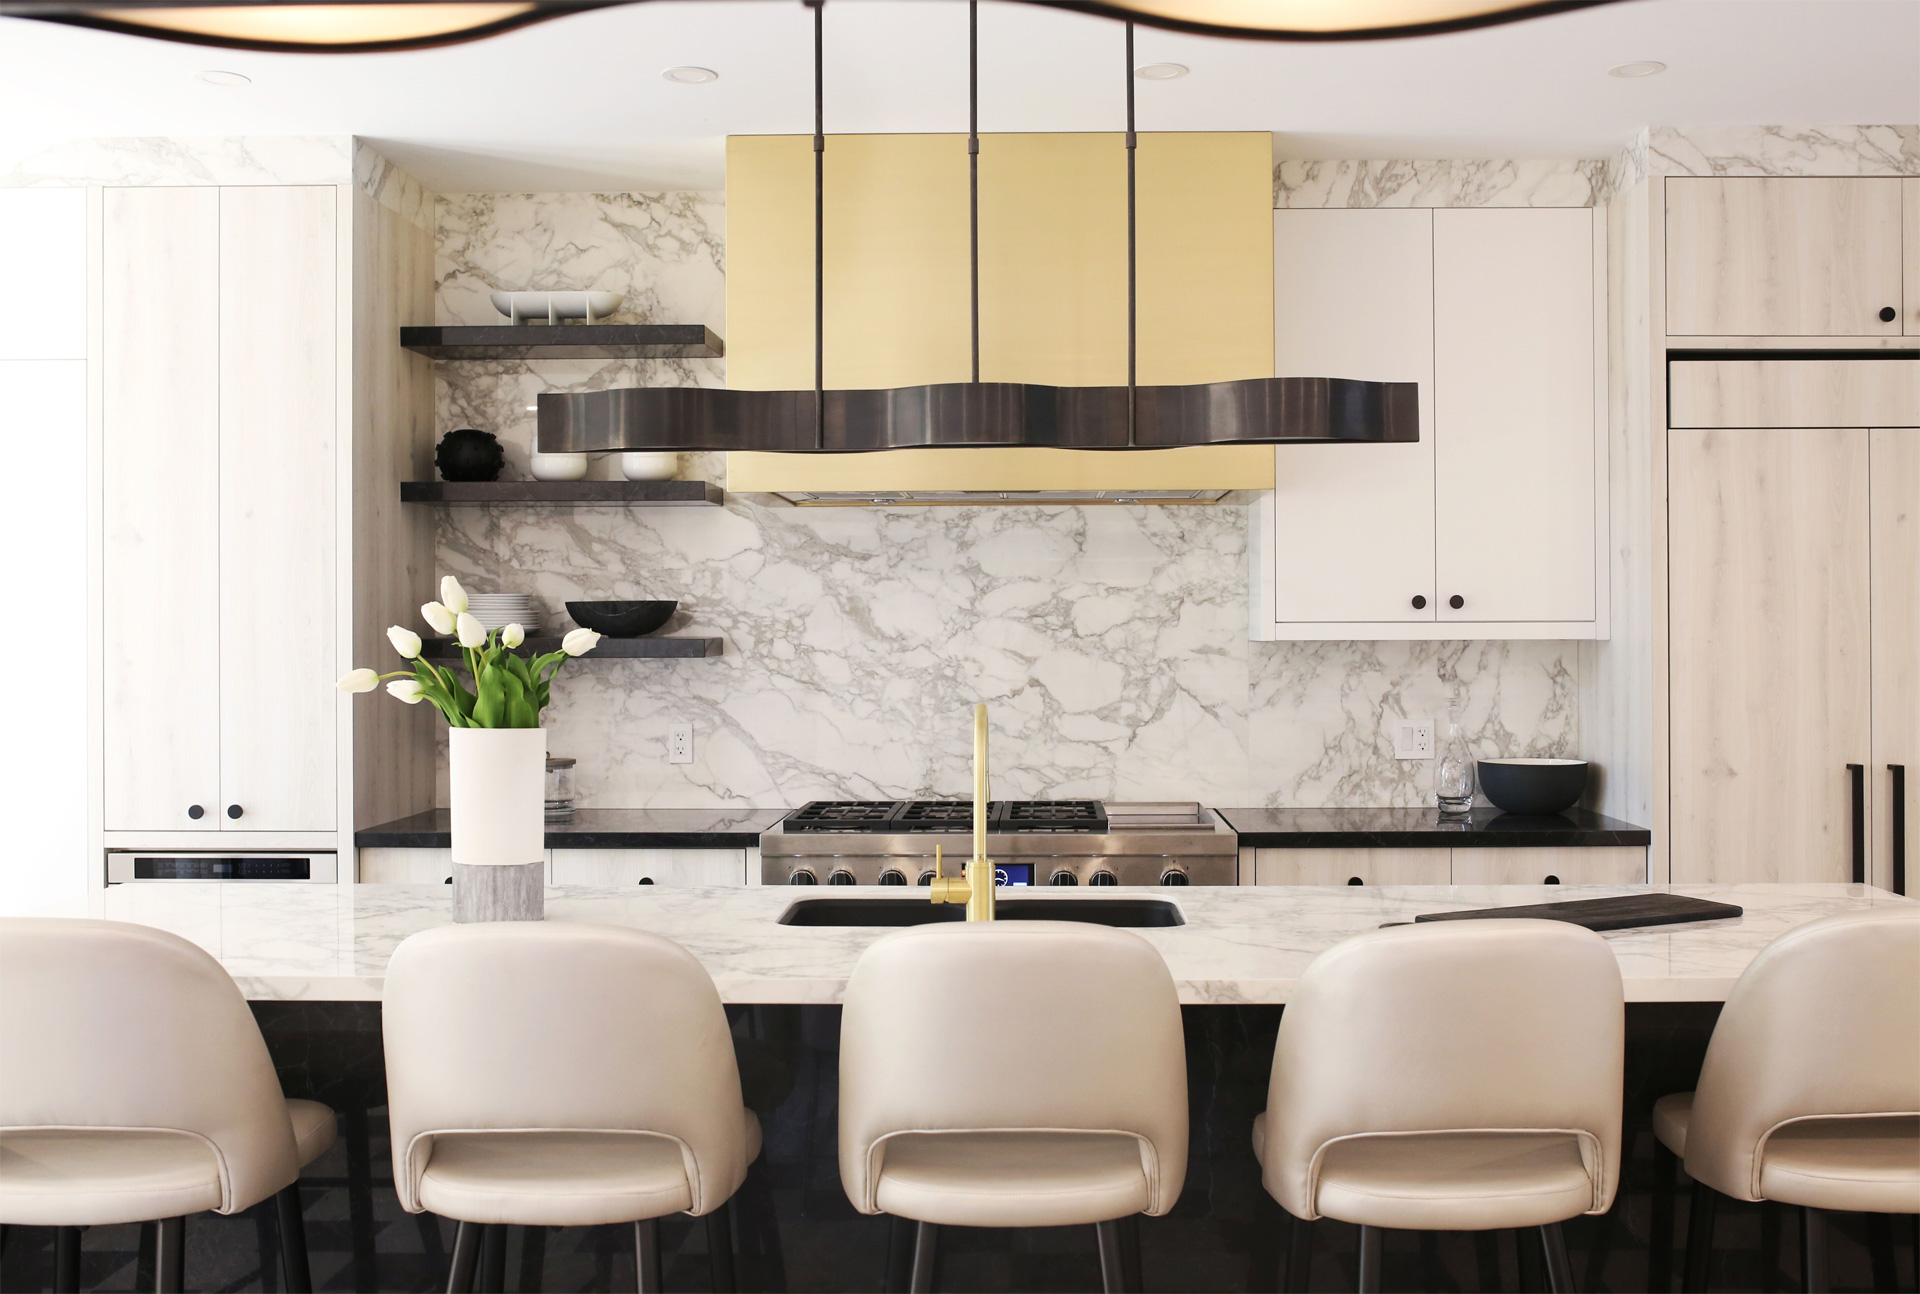 porcelain countertops learn more about this trend